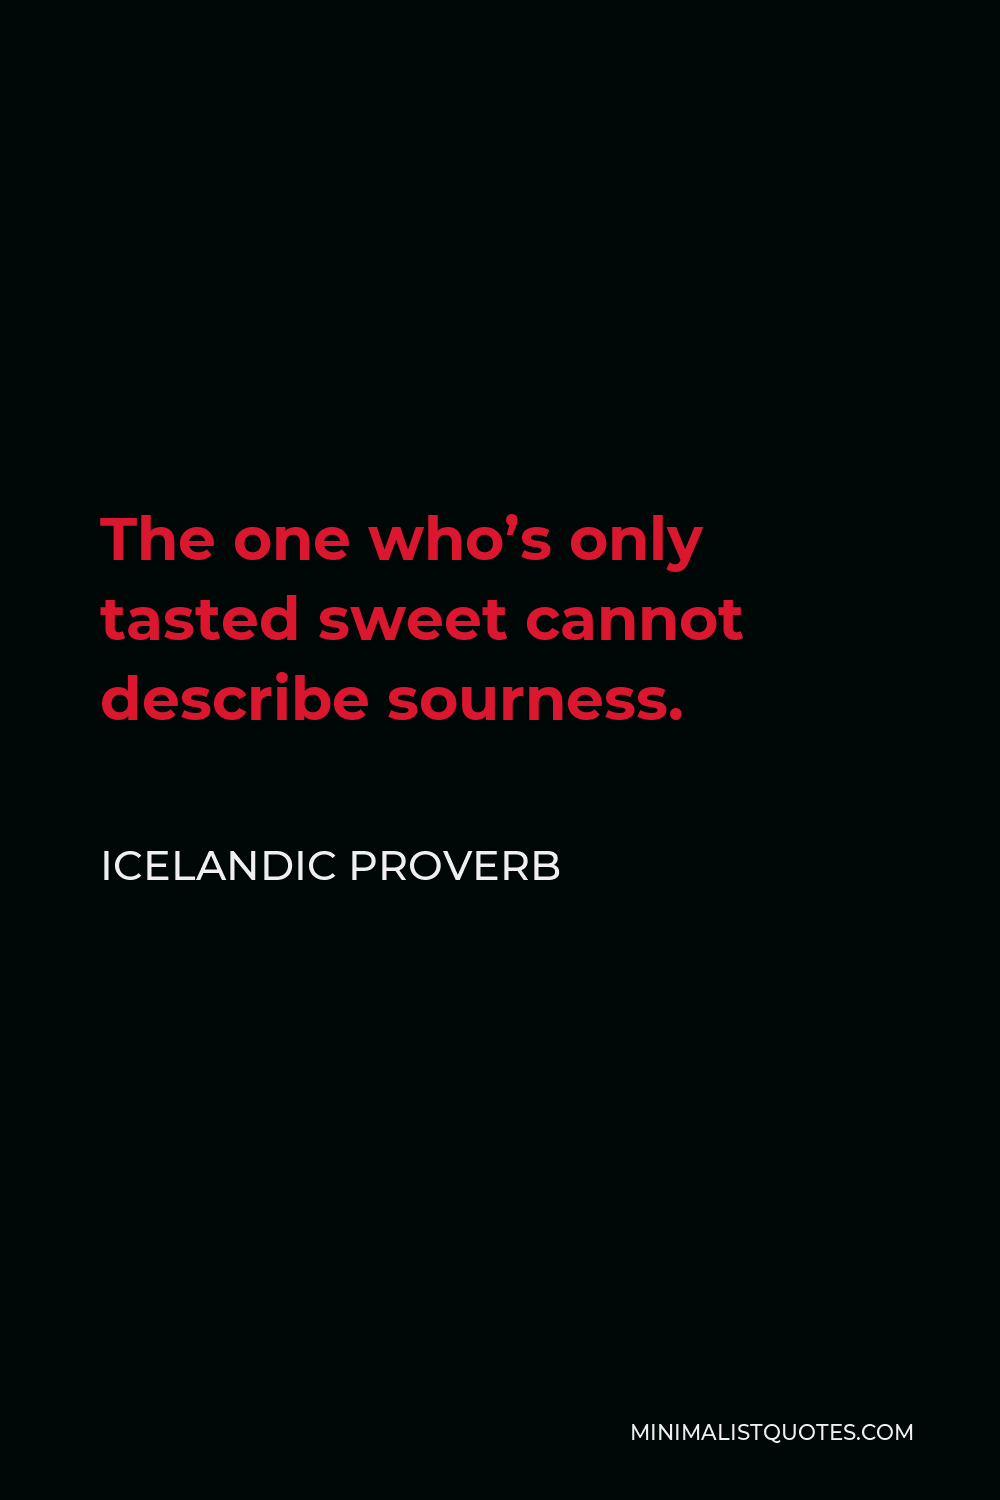 Icelandic Proverb Quote - The one who’s only tasted sweet cannot describe sourness.